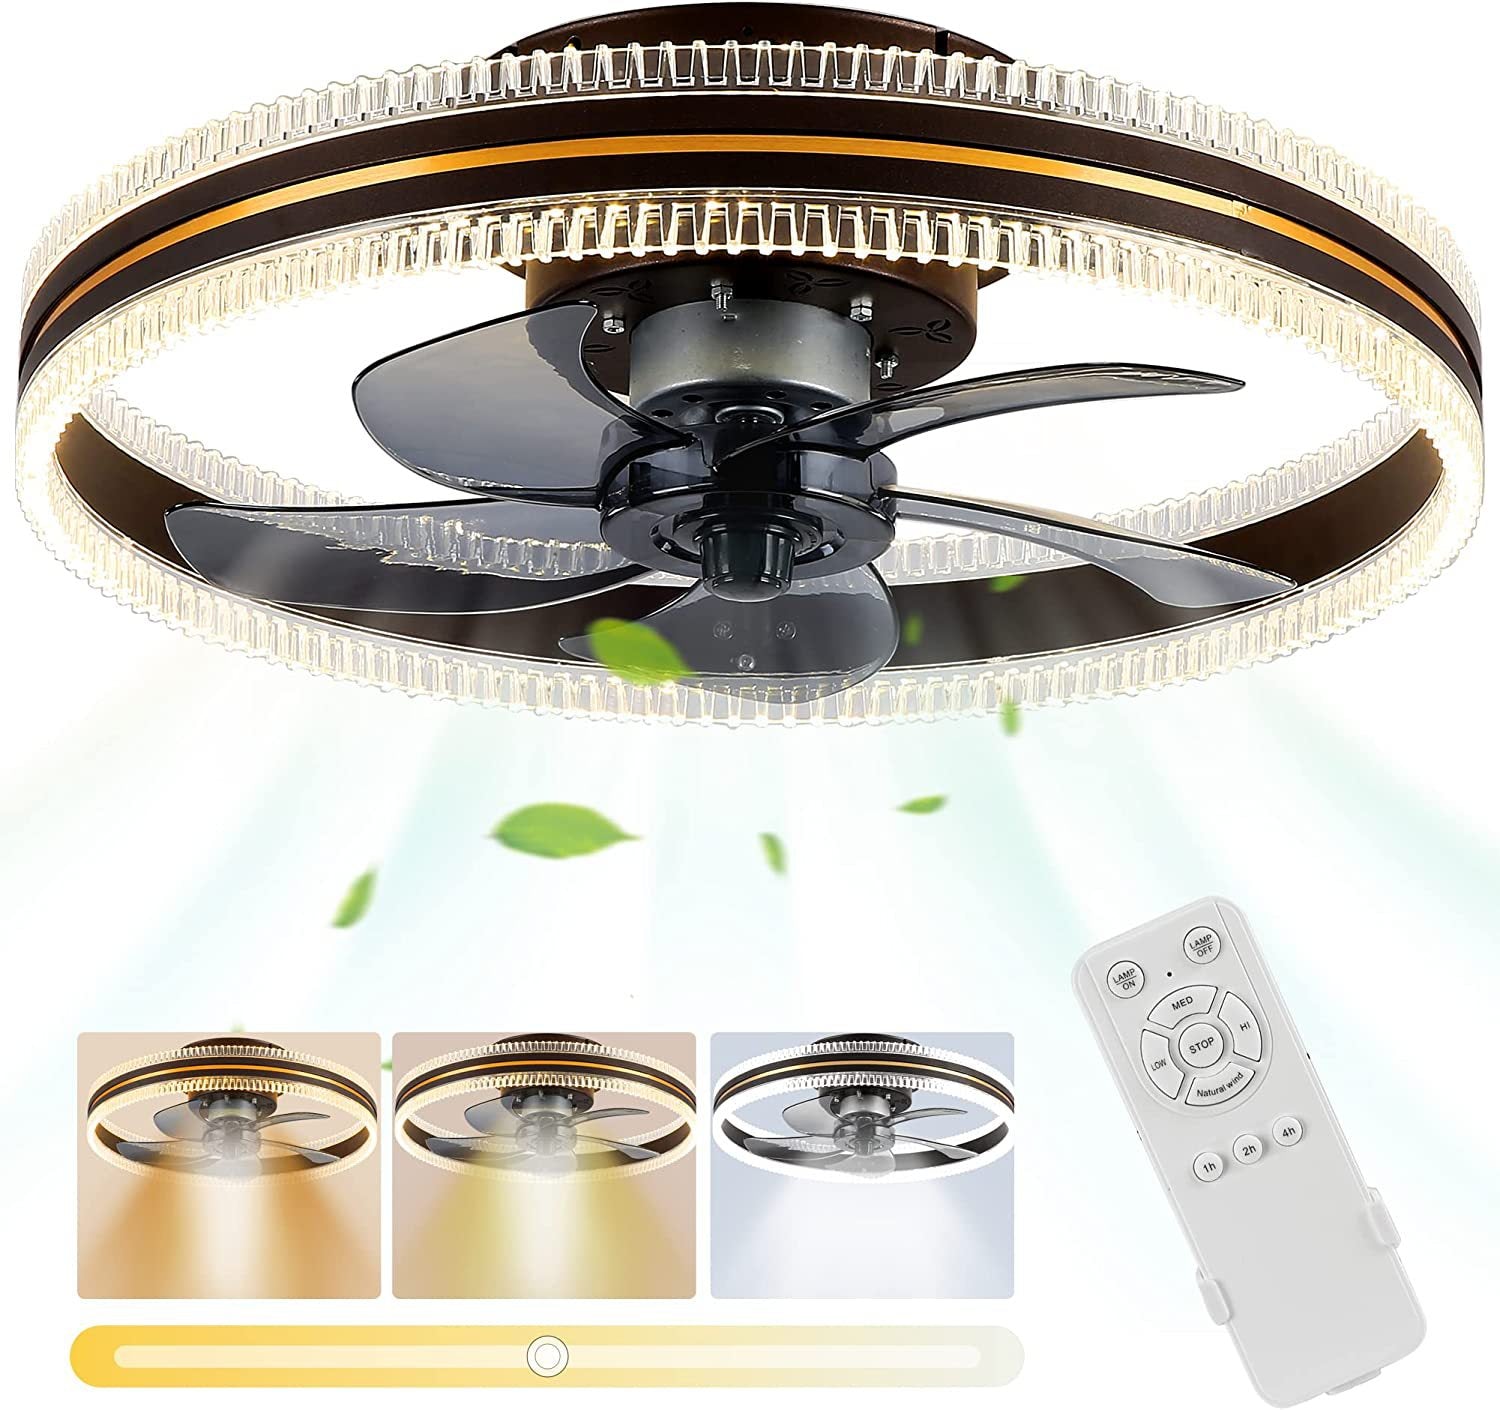 Ceiling Fans with Lamp Dimmable Reversible Motor four color Ceiling Fan Lighting for living room Bedroom Lounge - Luxitt